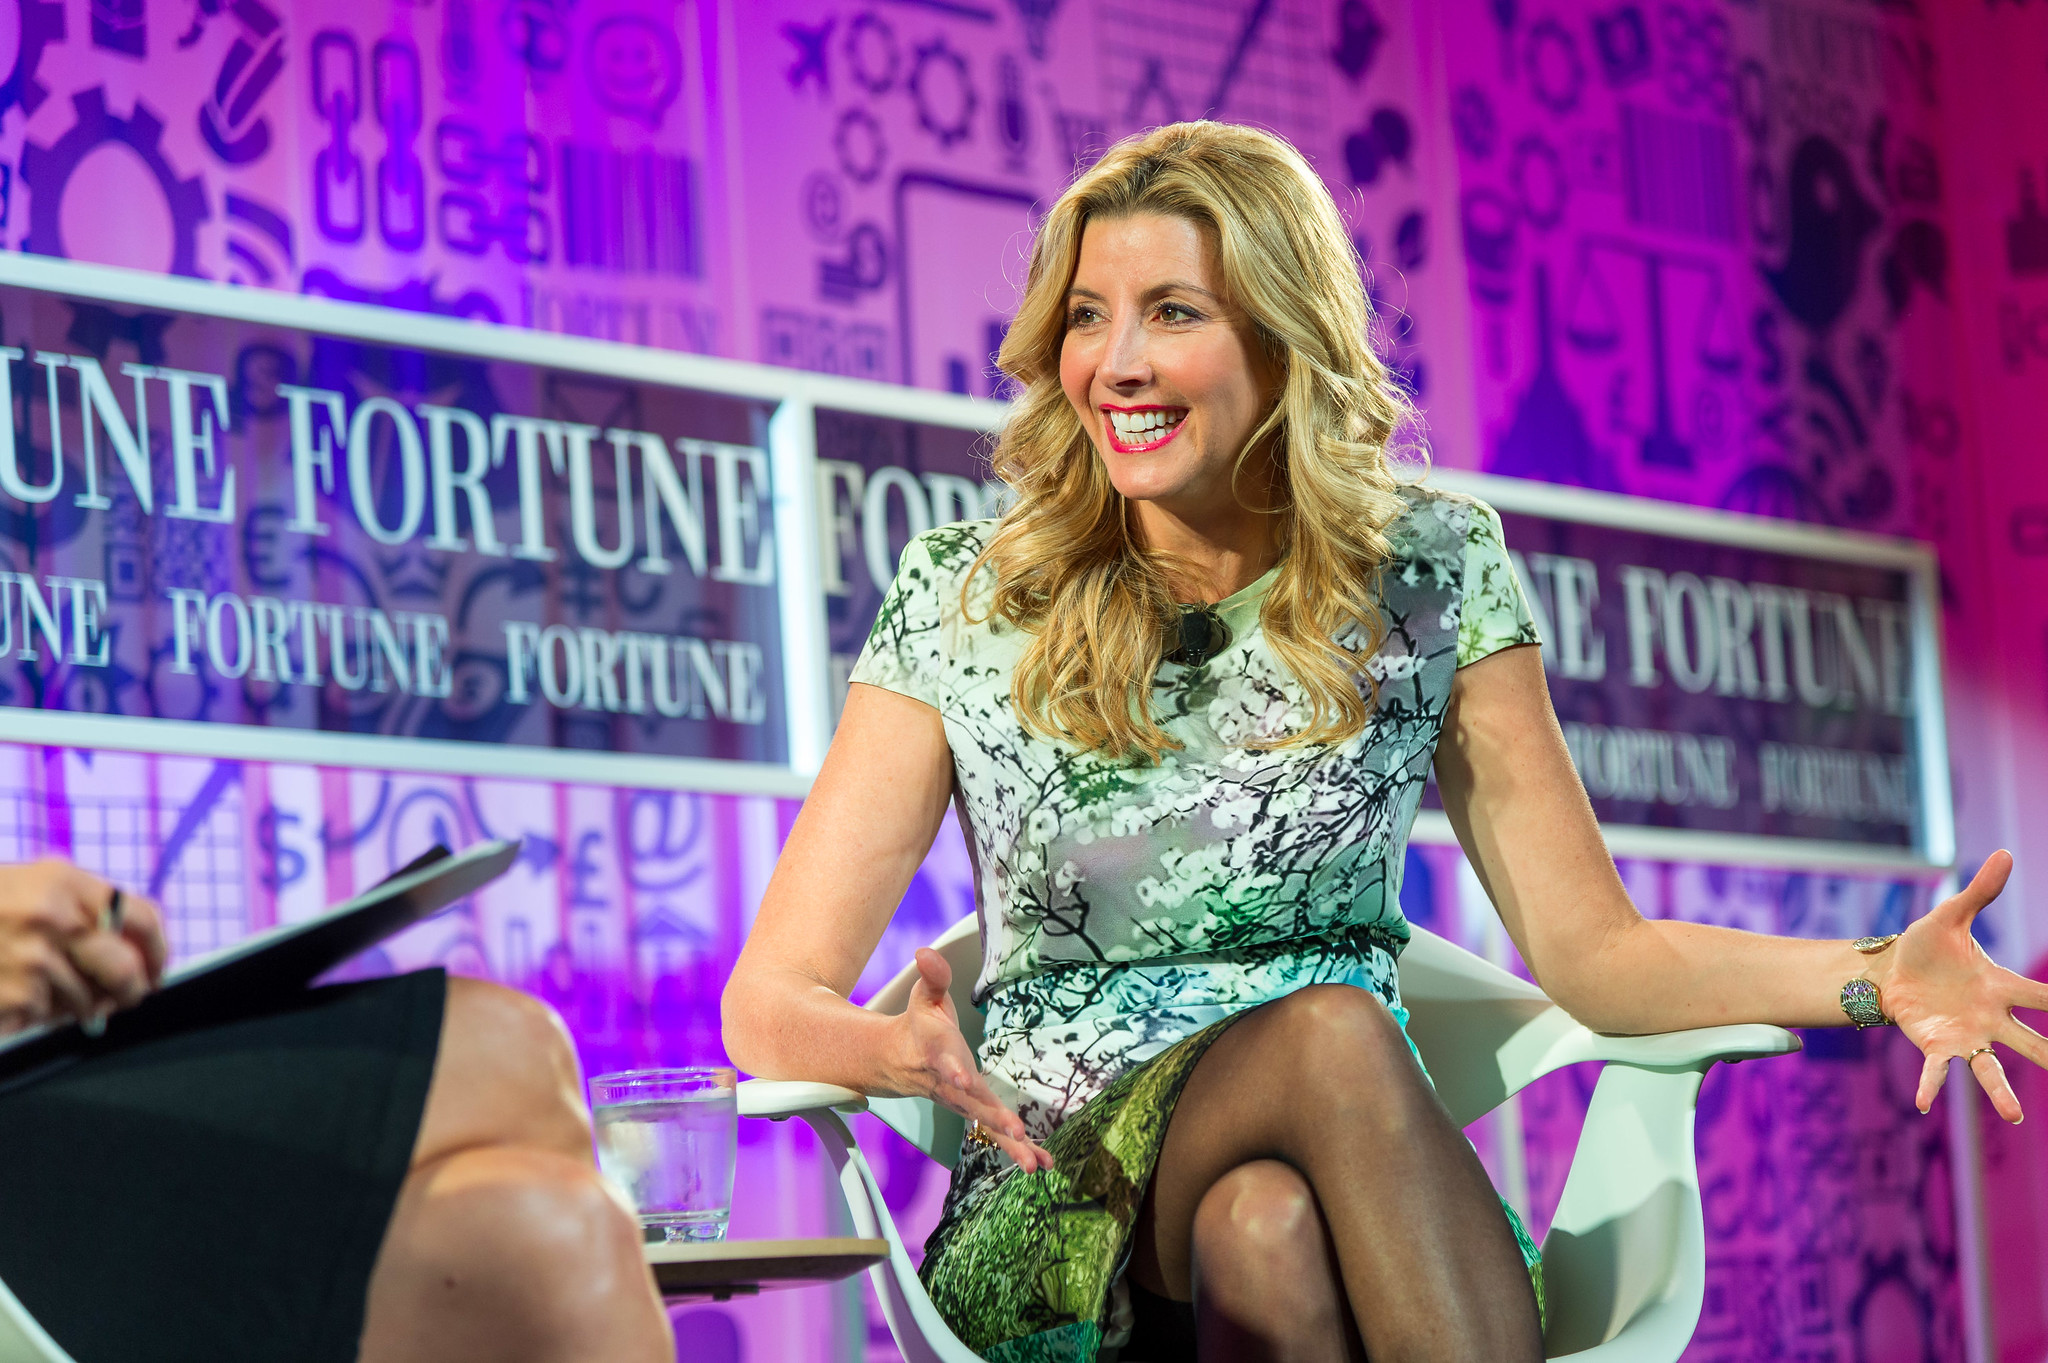 Spanx Founder Sara Blakely Just Identified the No. 1 Reason People Don't  Succeed (and It's Quite Brilliant)